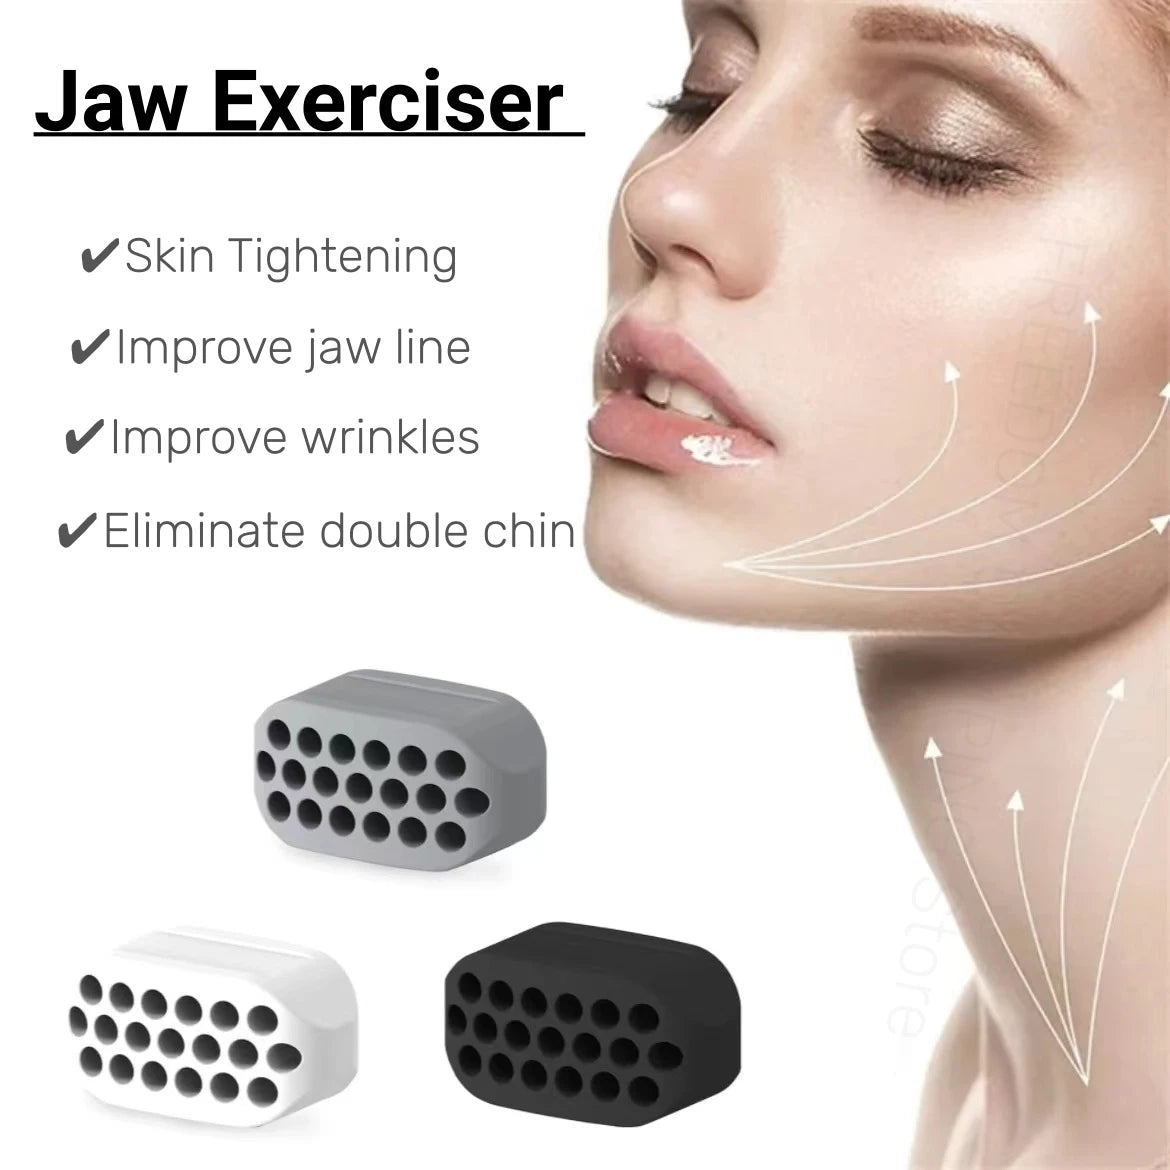 Jaw Exercise Ball Food-Grade Silica Gel Jawline Muscle Trainin Fitness Slimming Ball Nack Face Toning Jaw Exerciser Relex Gadget